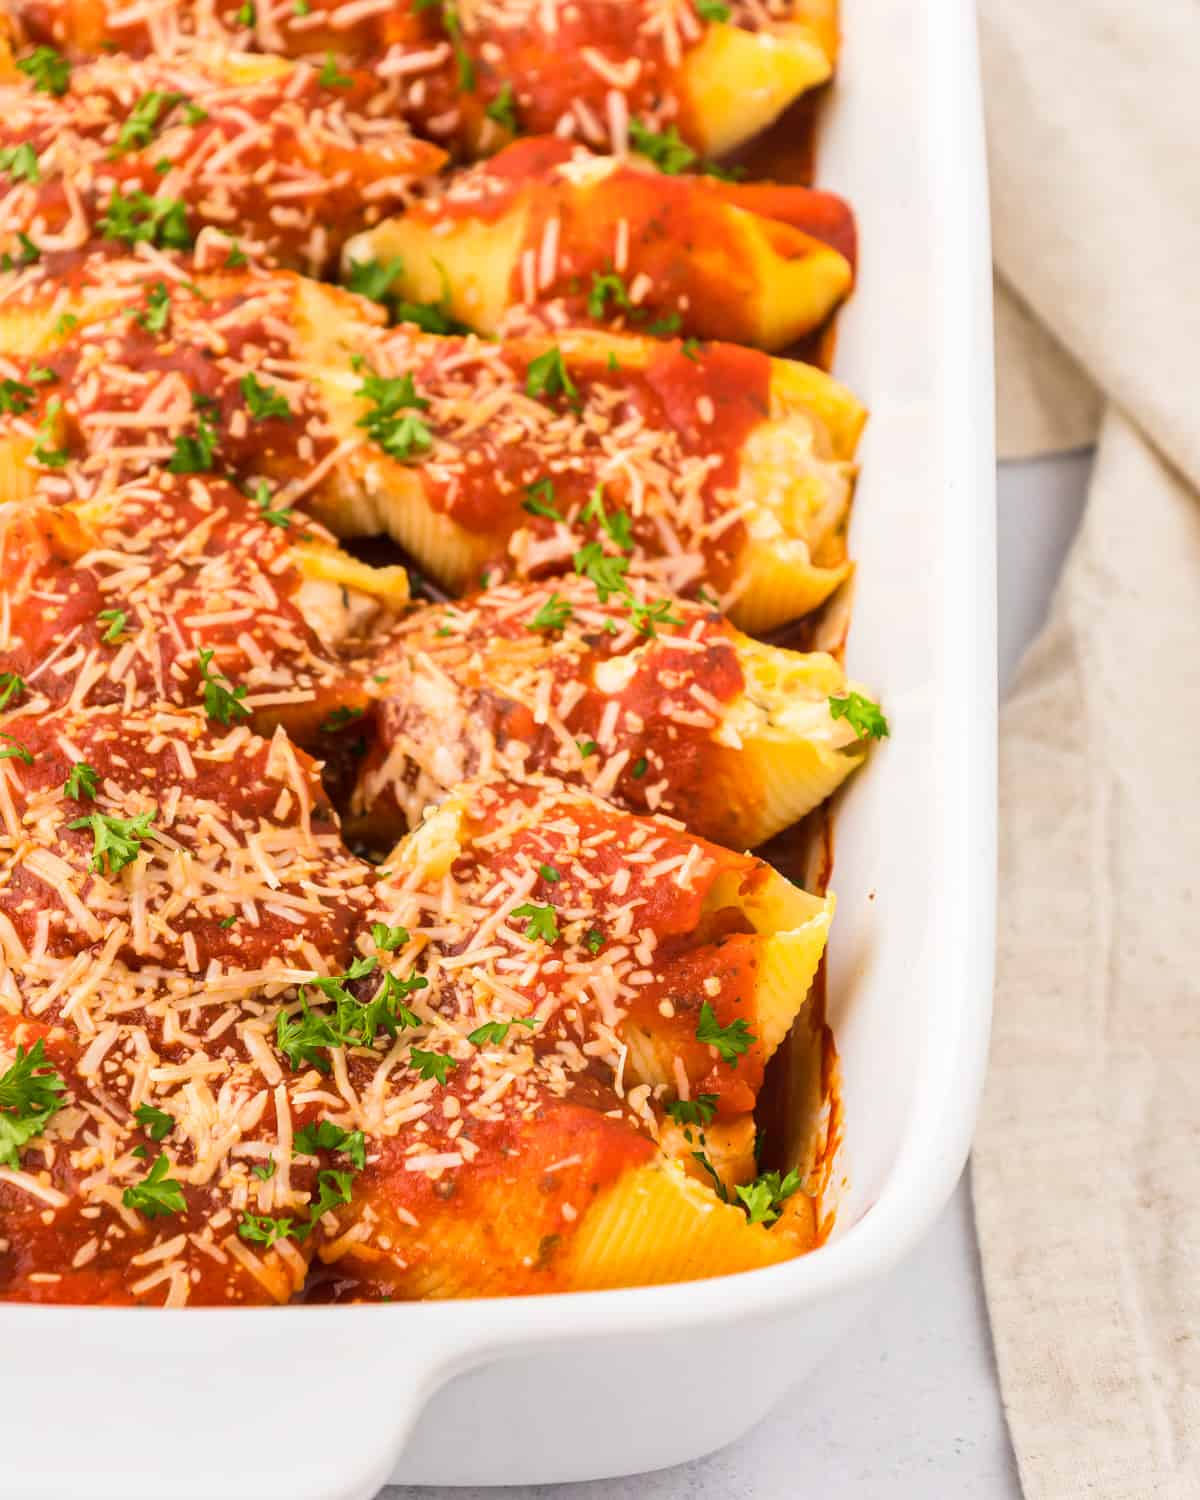 Chicken stuffed shells with marinara sauce and parmesan cheese in a white baking dish.